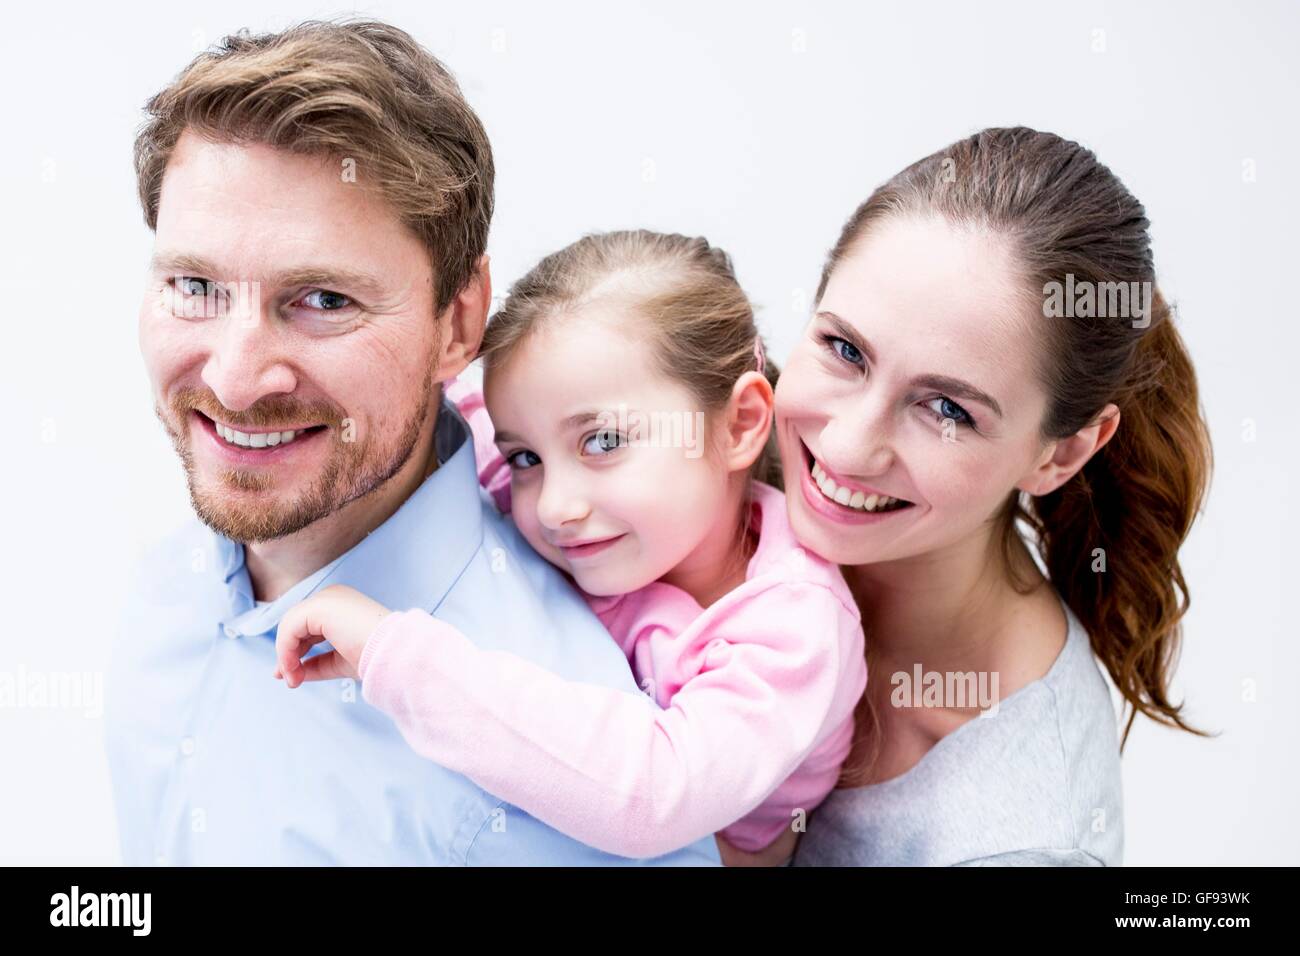 MODEL RELEASED. Portrait of dentist and dental assistant playing with girl, smiling. Stock Photo